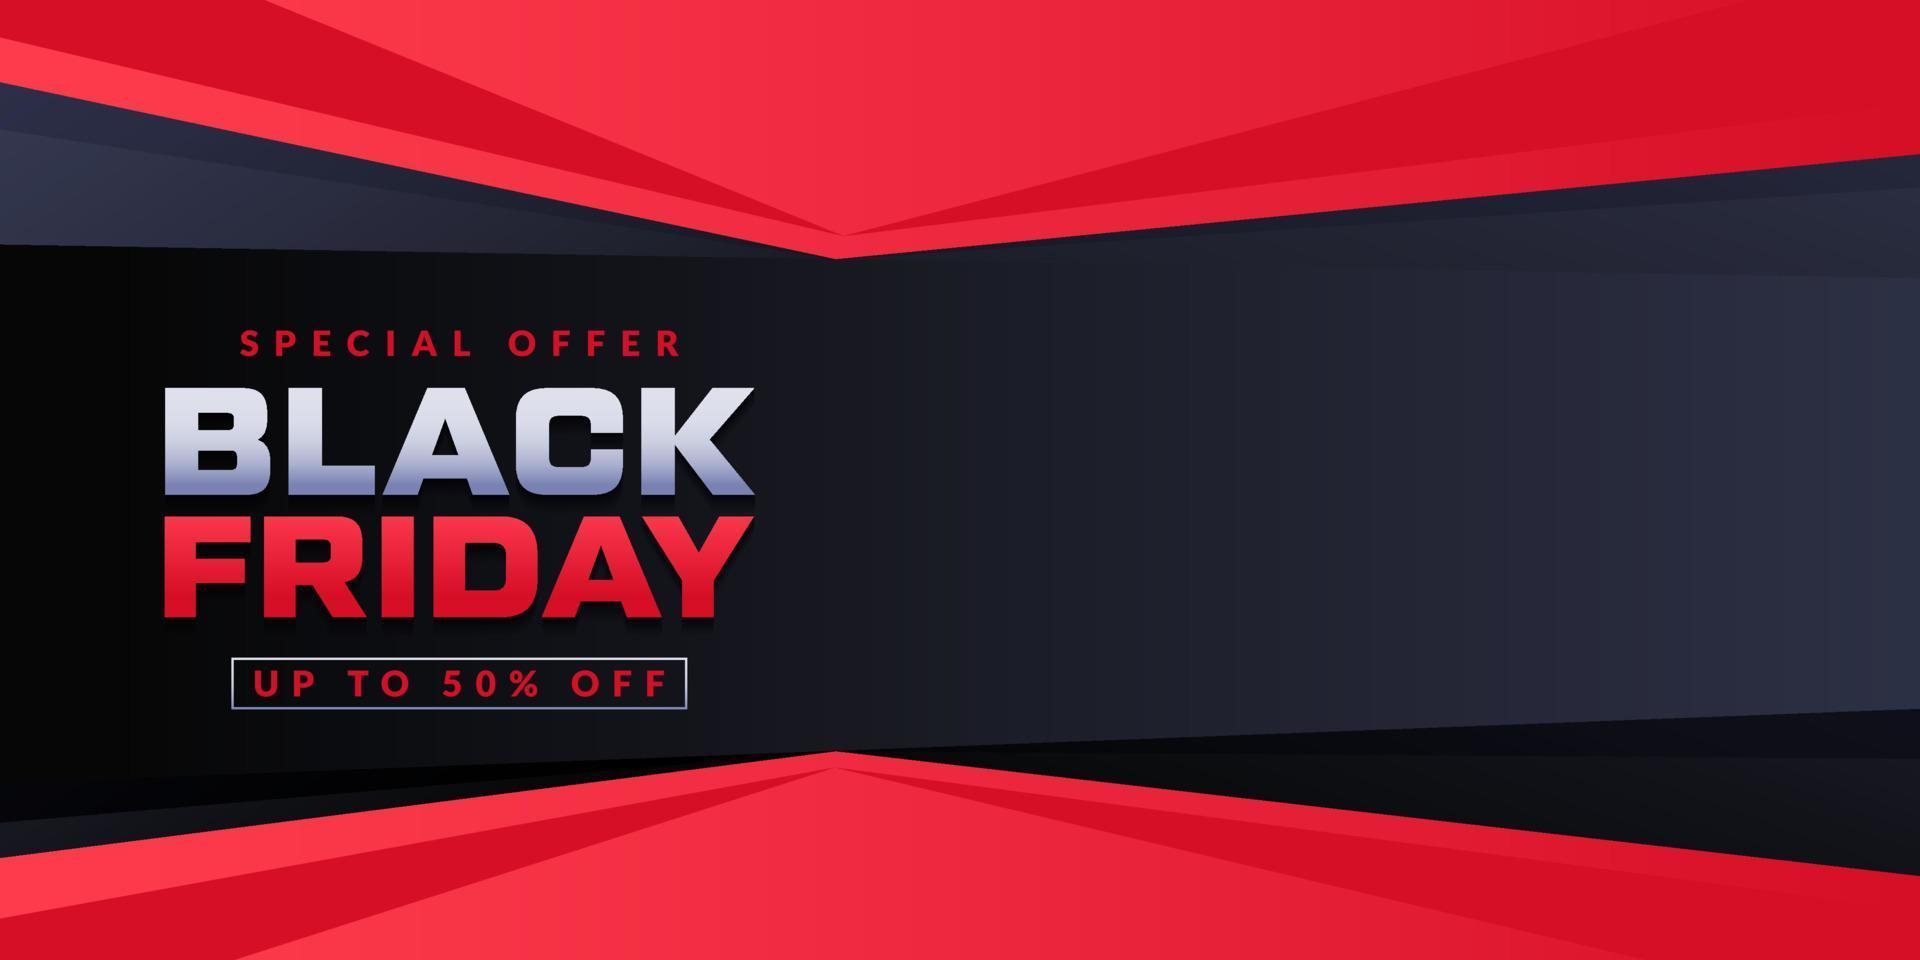 Black friday sale banner design, vector design background for media promotion and social media post with copy space for add photo product